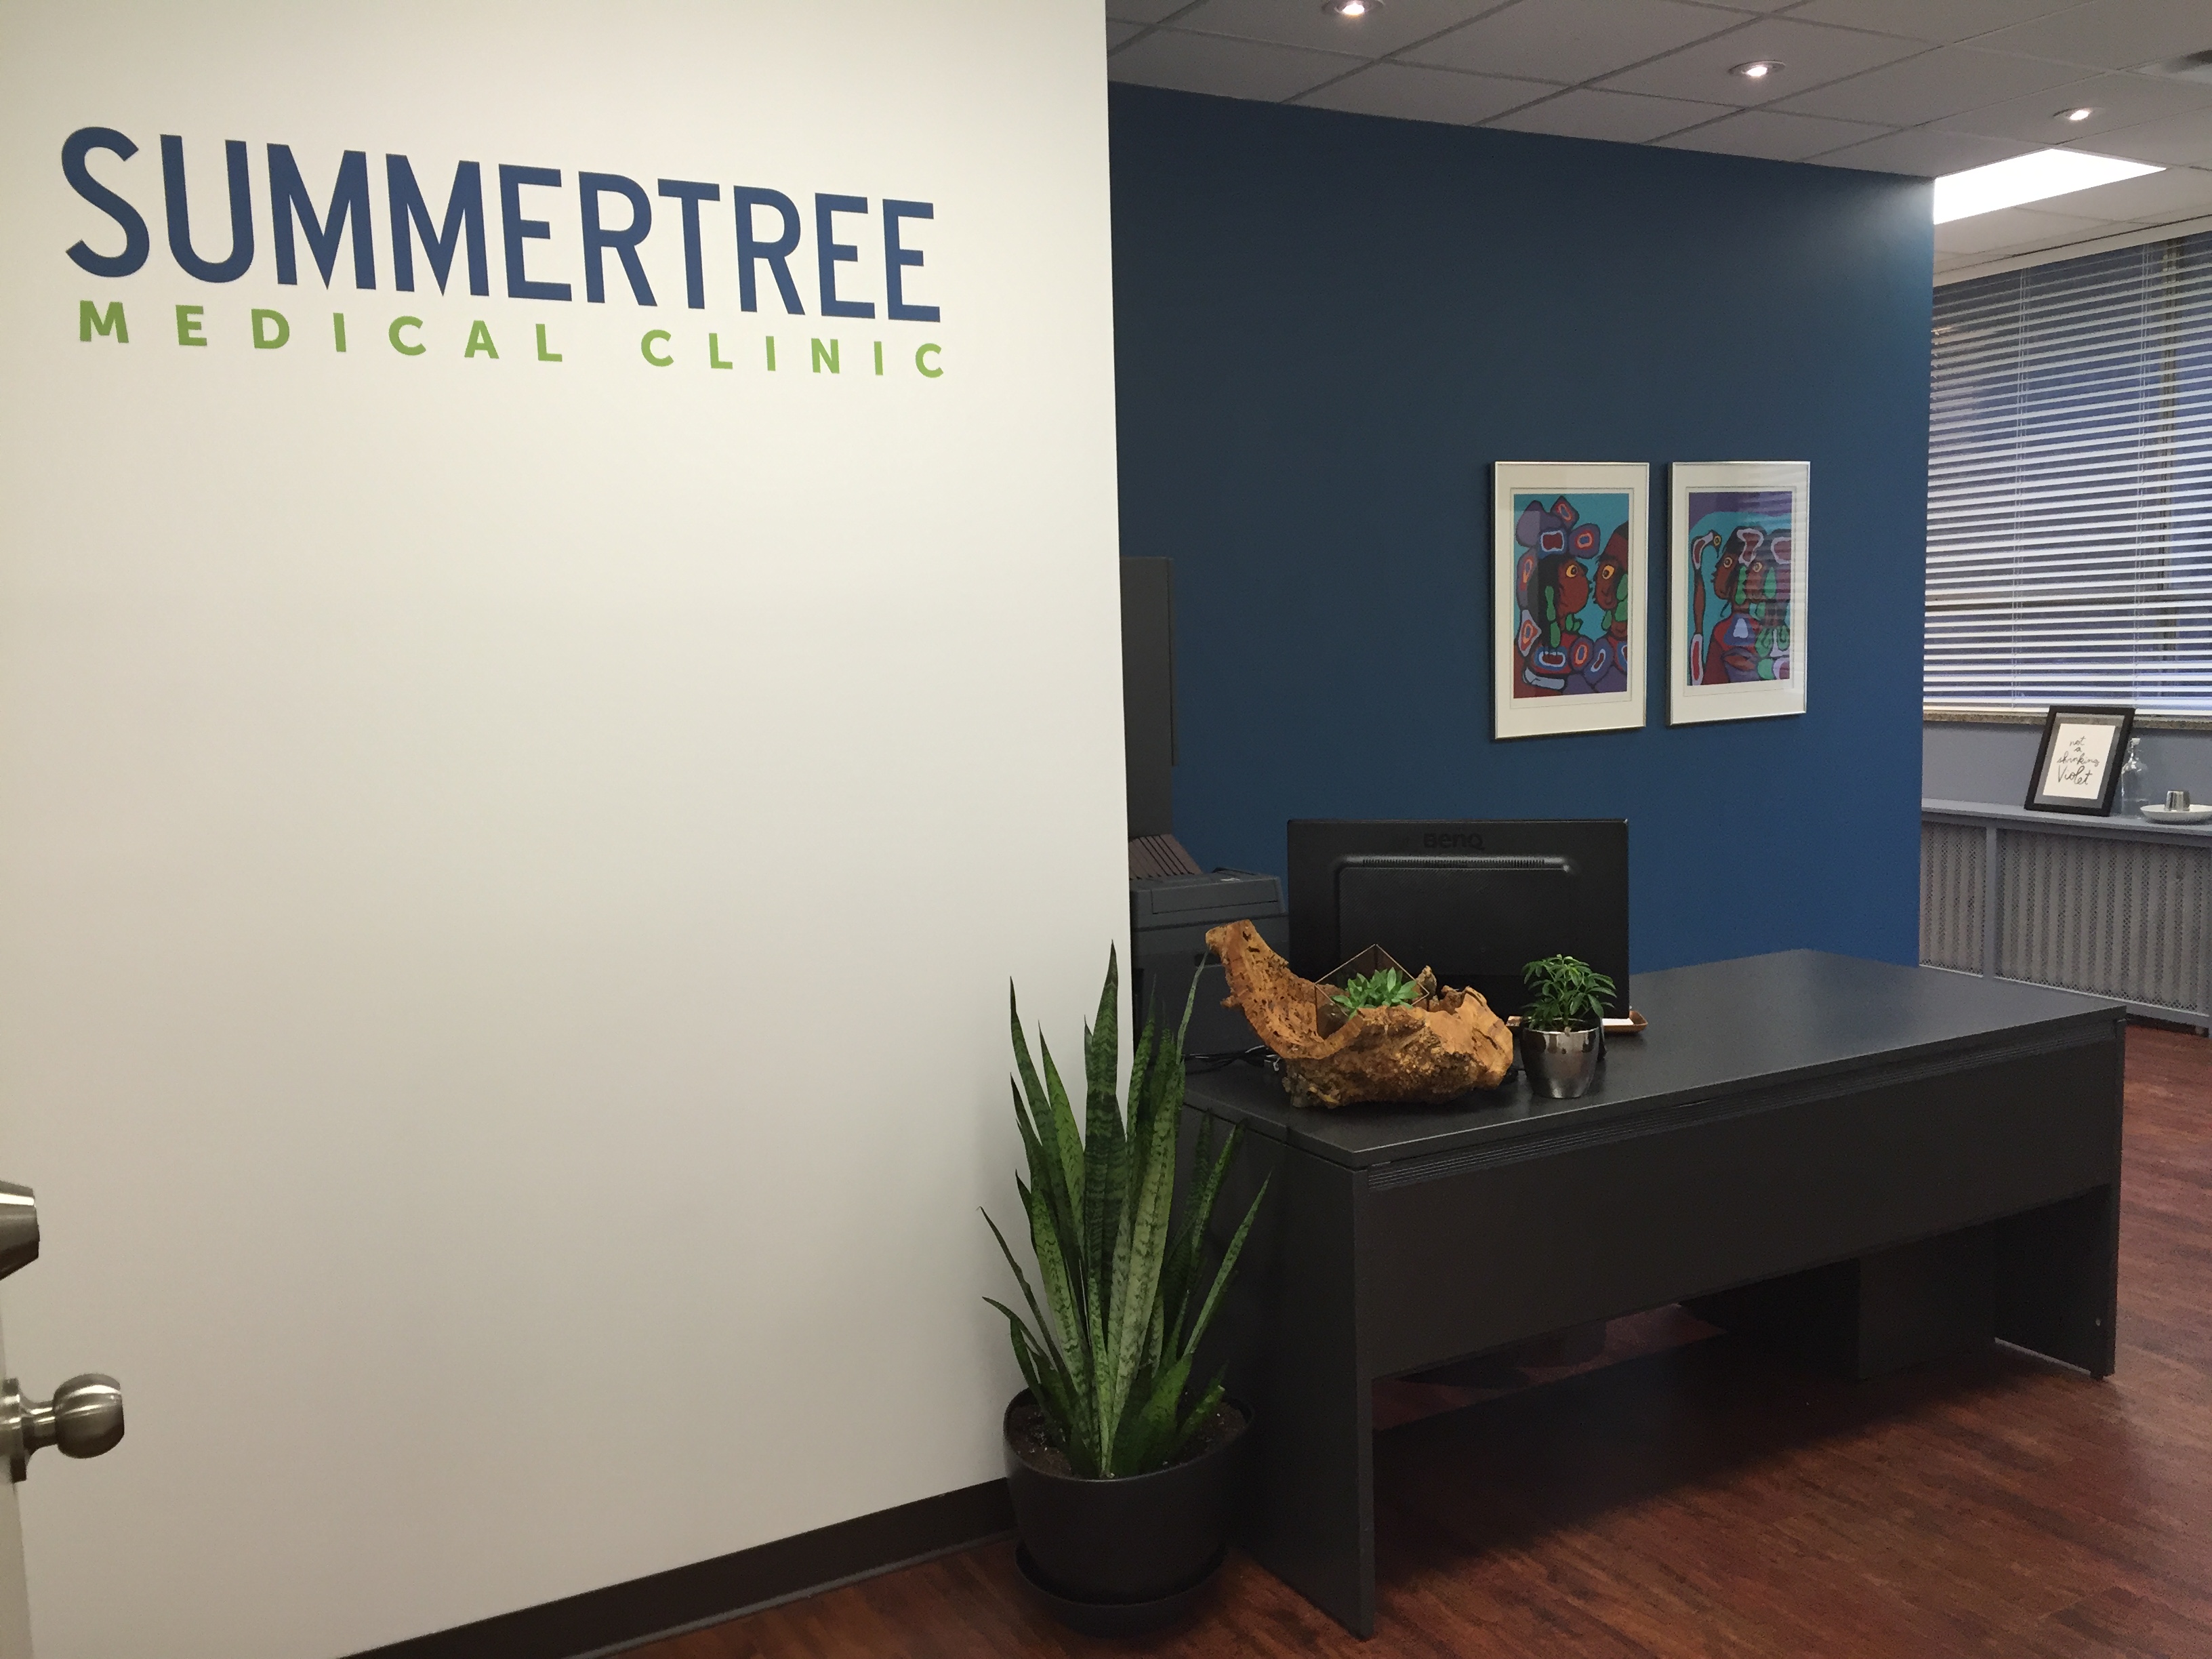 Welcome to Summertree Medical Clinic - Cannabis clinic providing prescriptions for chronic pain